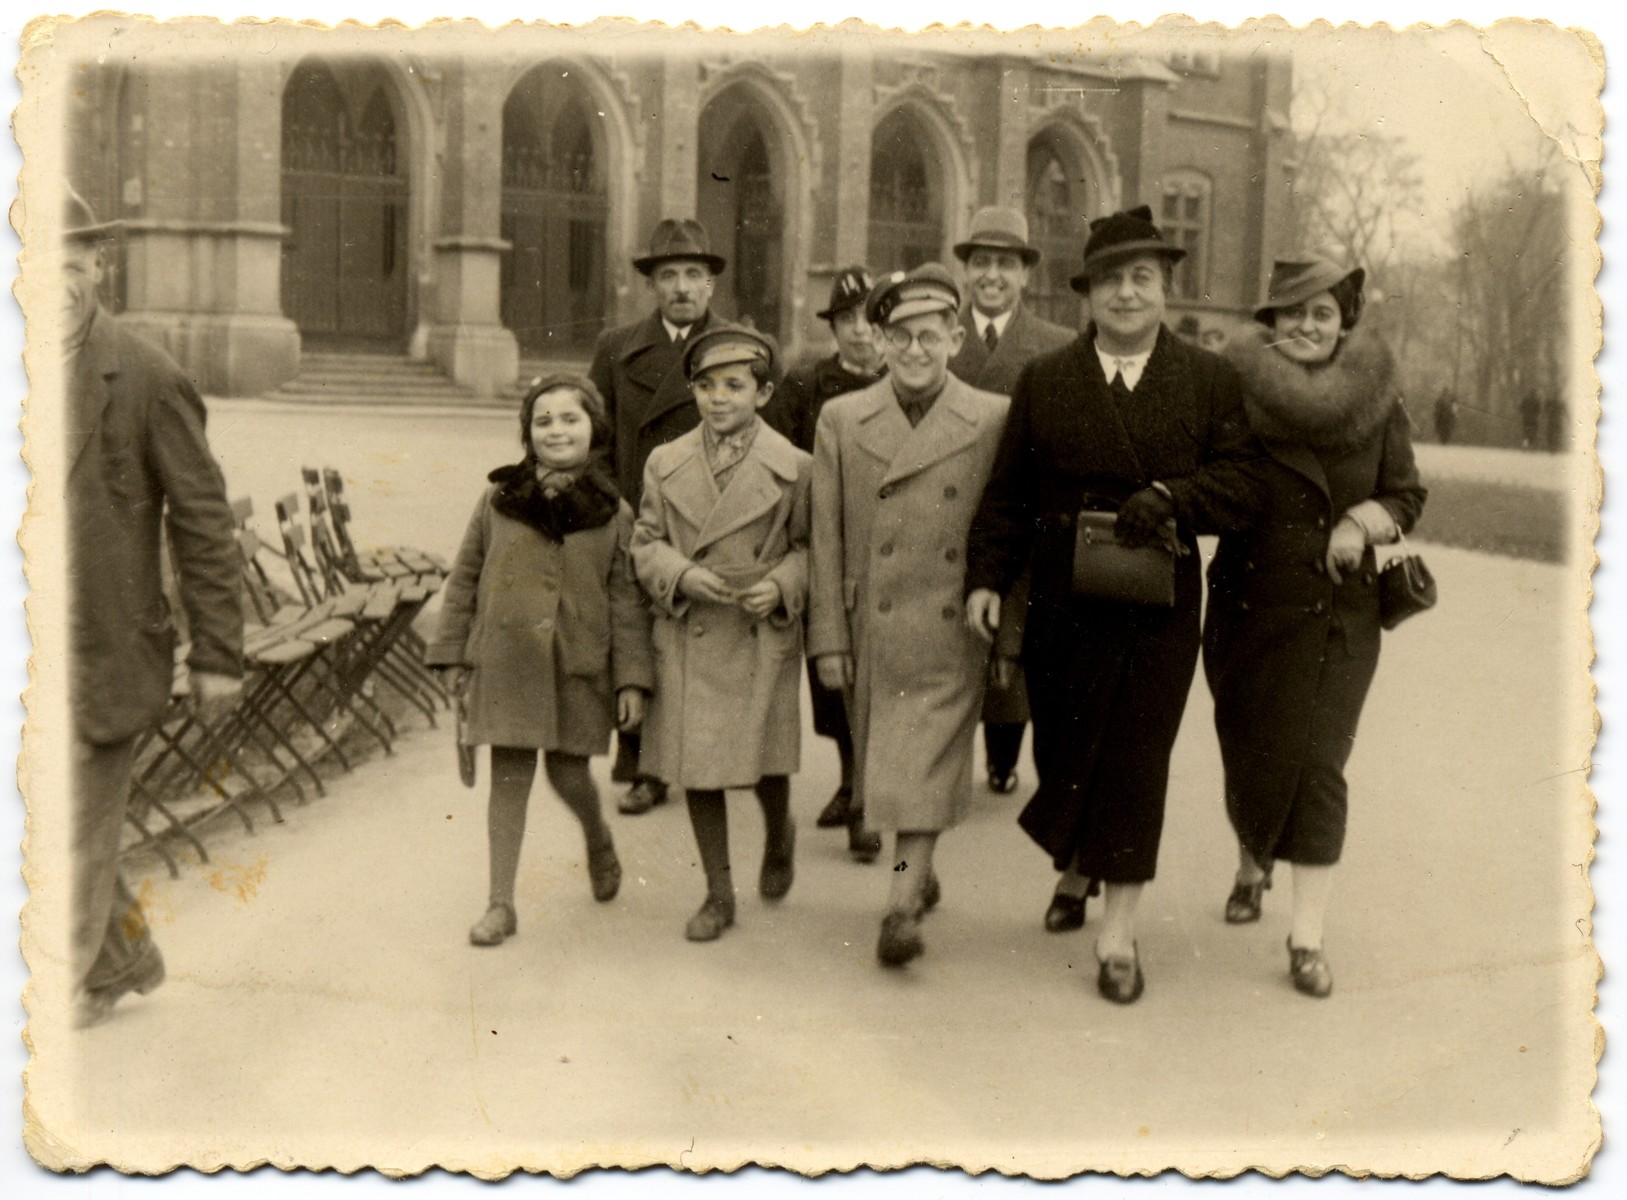 Group portrait of adults and children walking in front of the Jagiellonski University in Krakow. 

Pictured in the front row, from left to right, are Dola and Josef Horowitz, unknown, Esther? Zehnwirth and Rozia Lesser.  In the back row, from left to right, are Chaim and Fela Horowitz, and Fela's brother, Monek Lesser who had just graduated from the Medical Faculty of the Jagiellonski University.